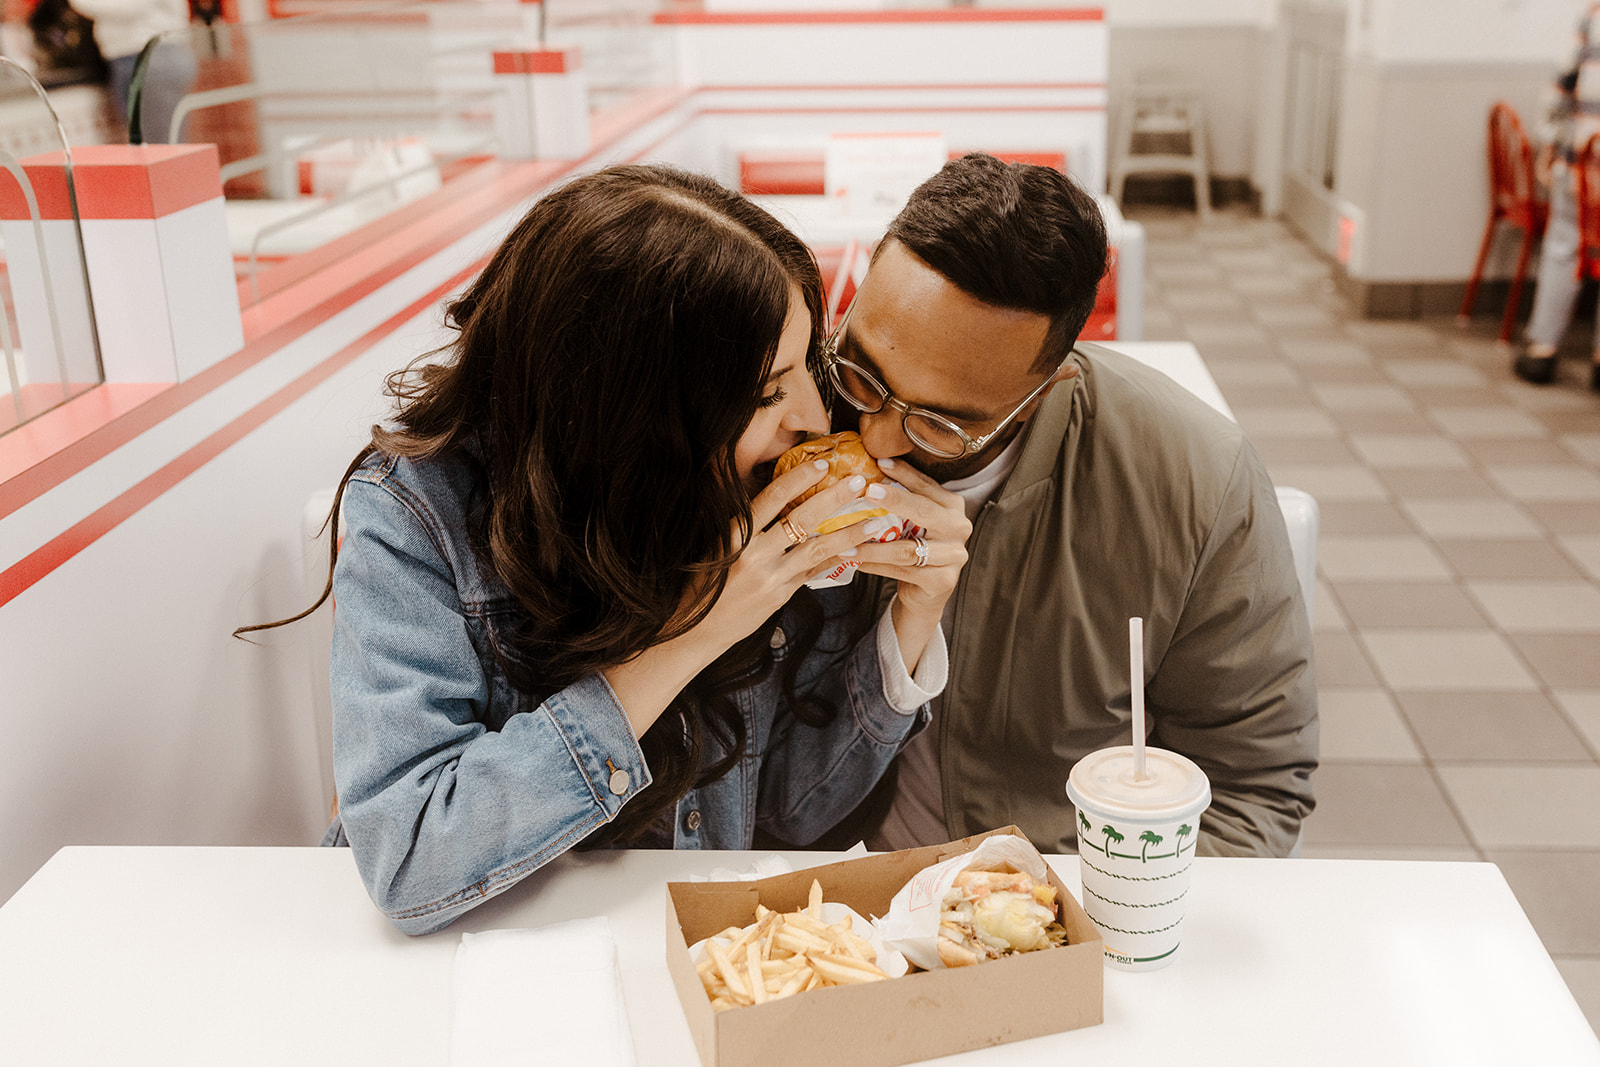 In n out engagement photos, creative engagement photos, Sacramento engagement photos, Sacramento engagement photographer, jean jacket engagement photos, unique engagement photos, fun engagement photos